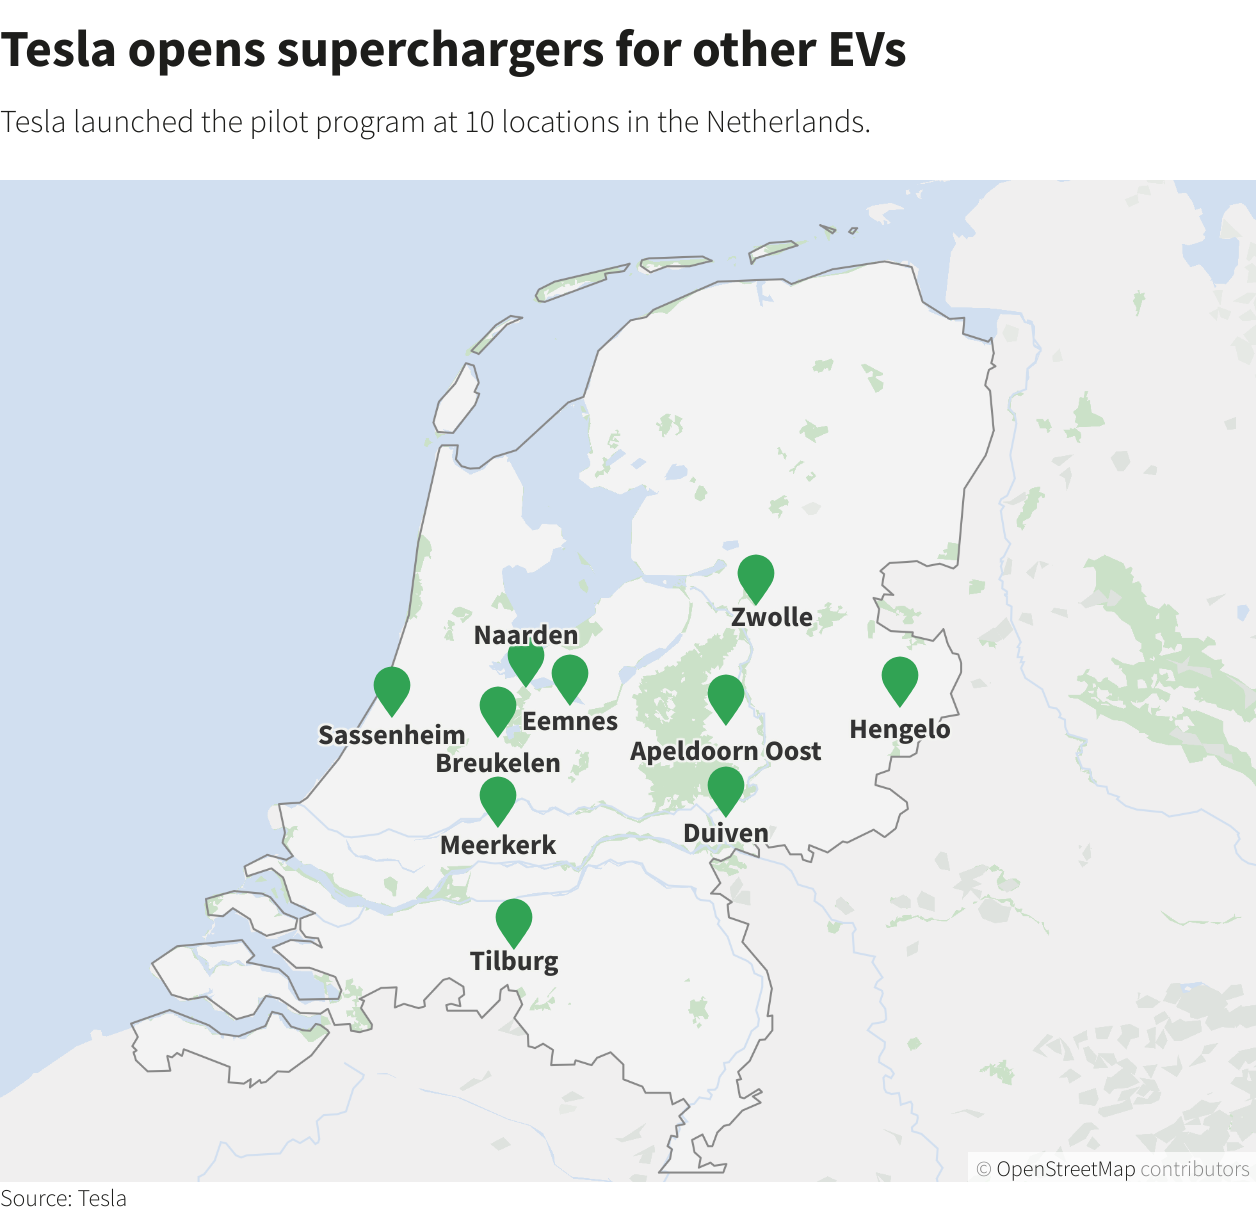 Tesla opens superchargers for other EVs